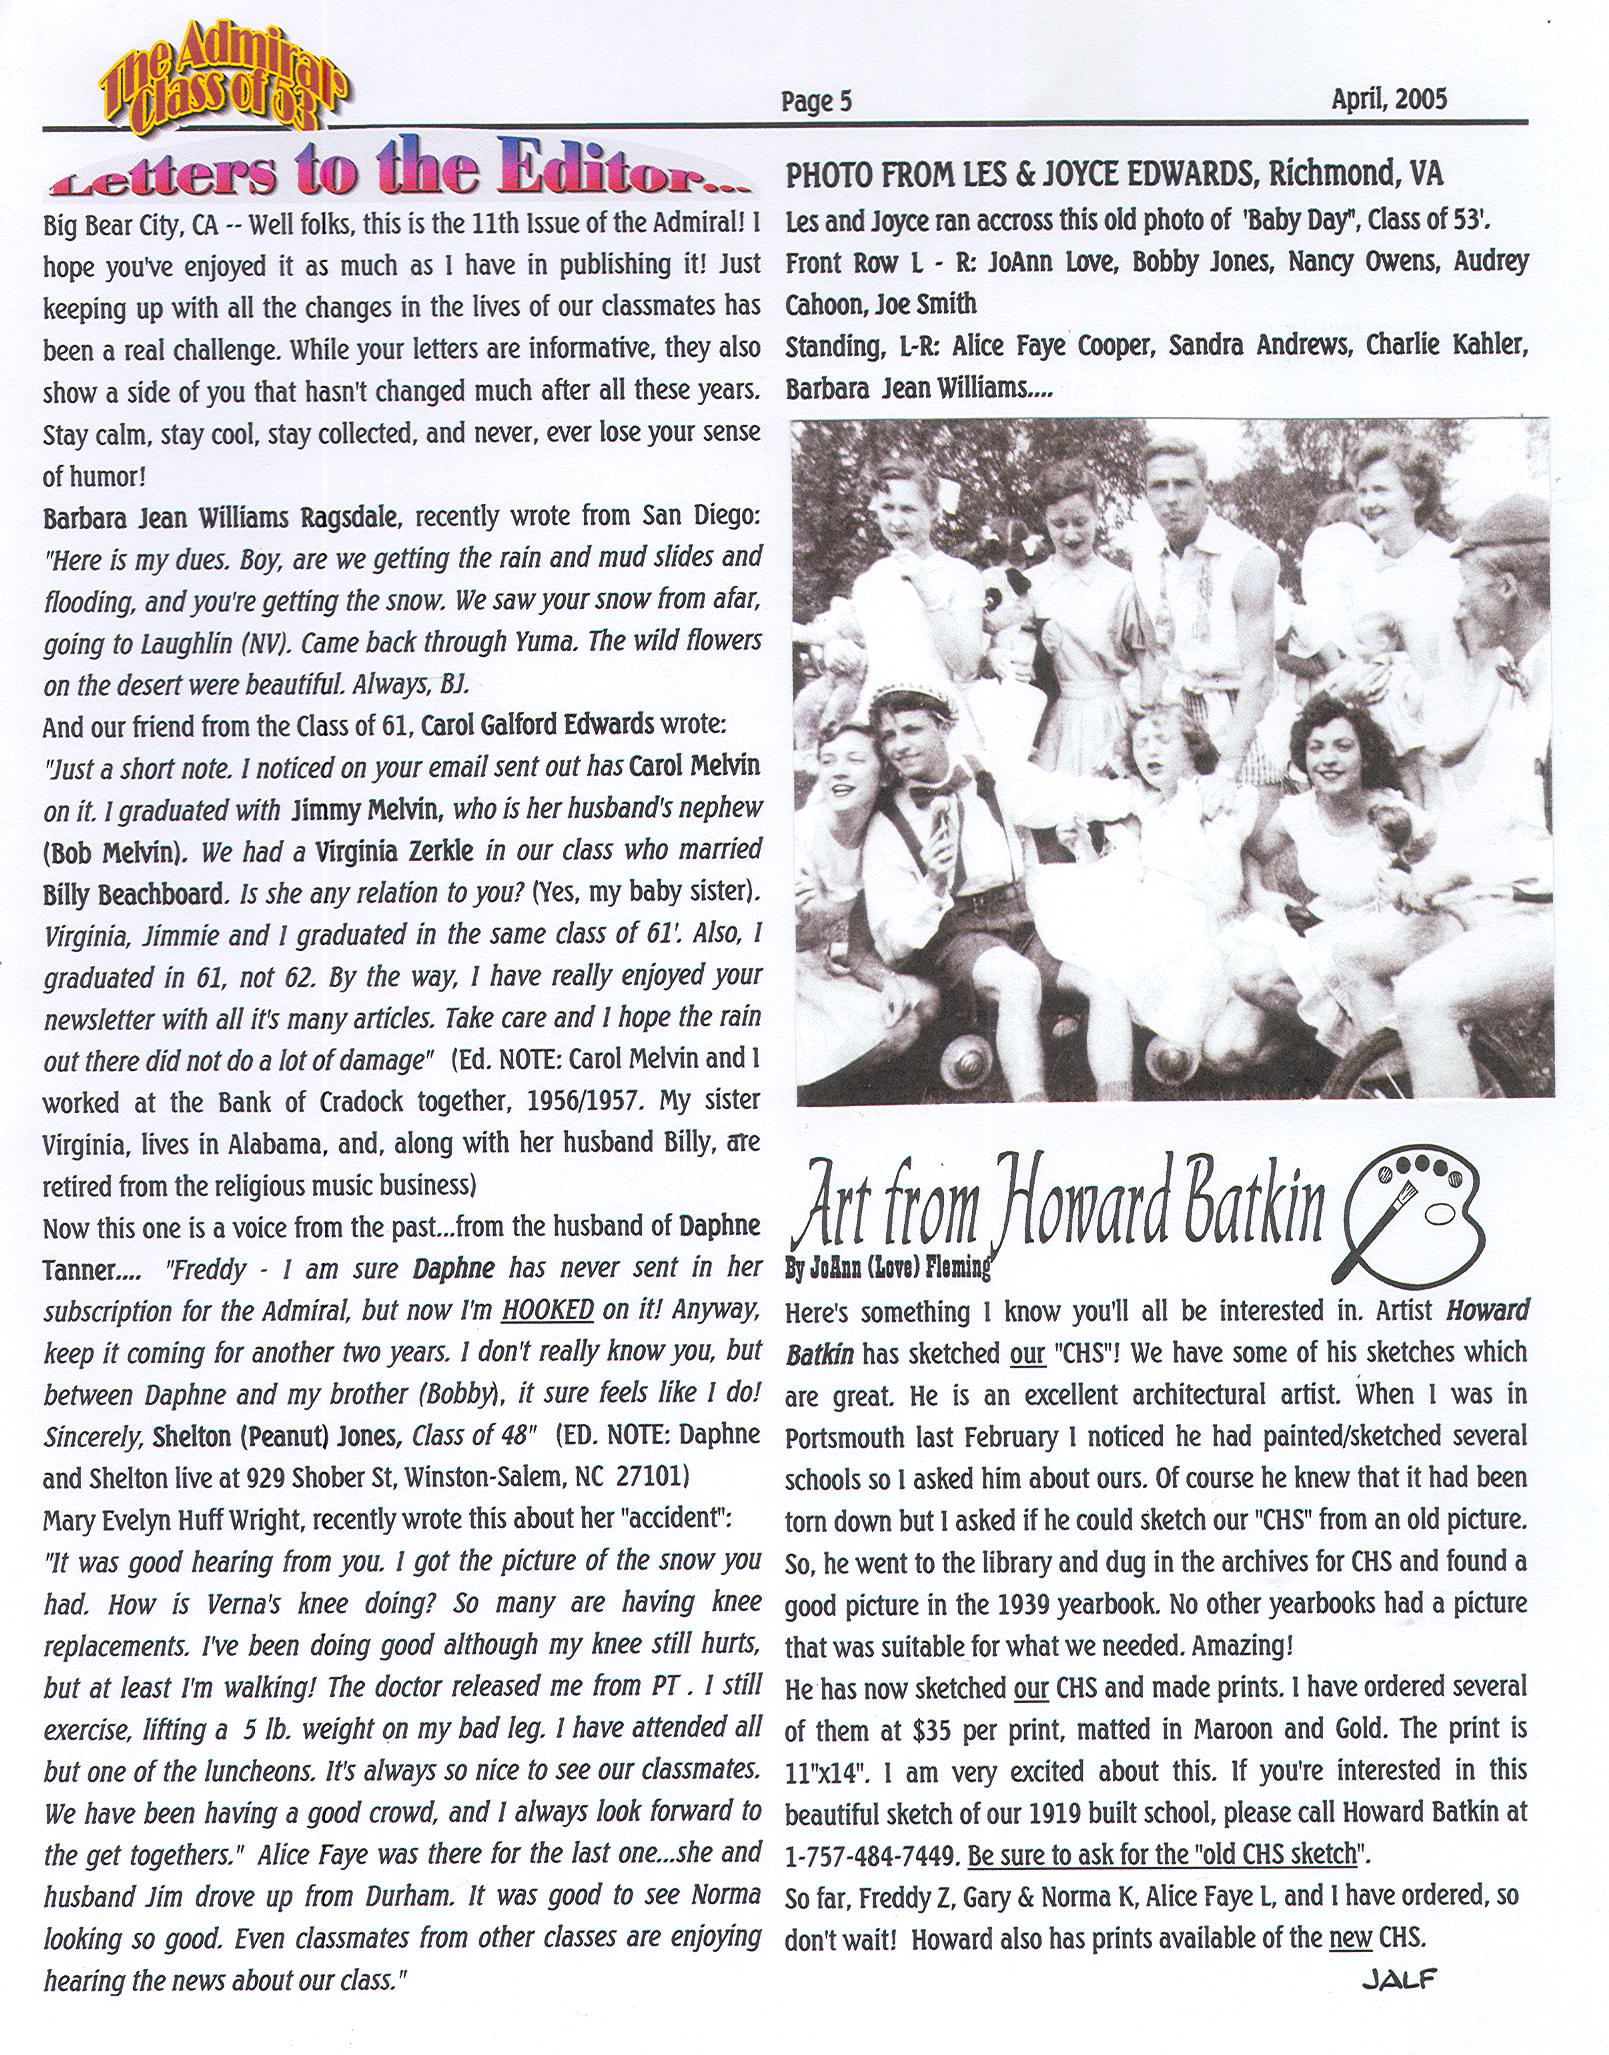 The Admiral - April 2005 - pg. 5